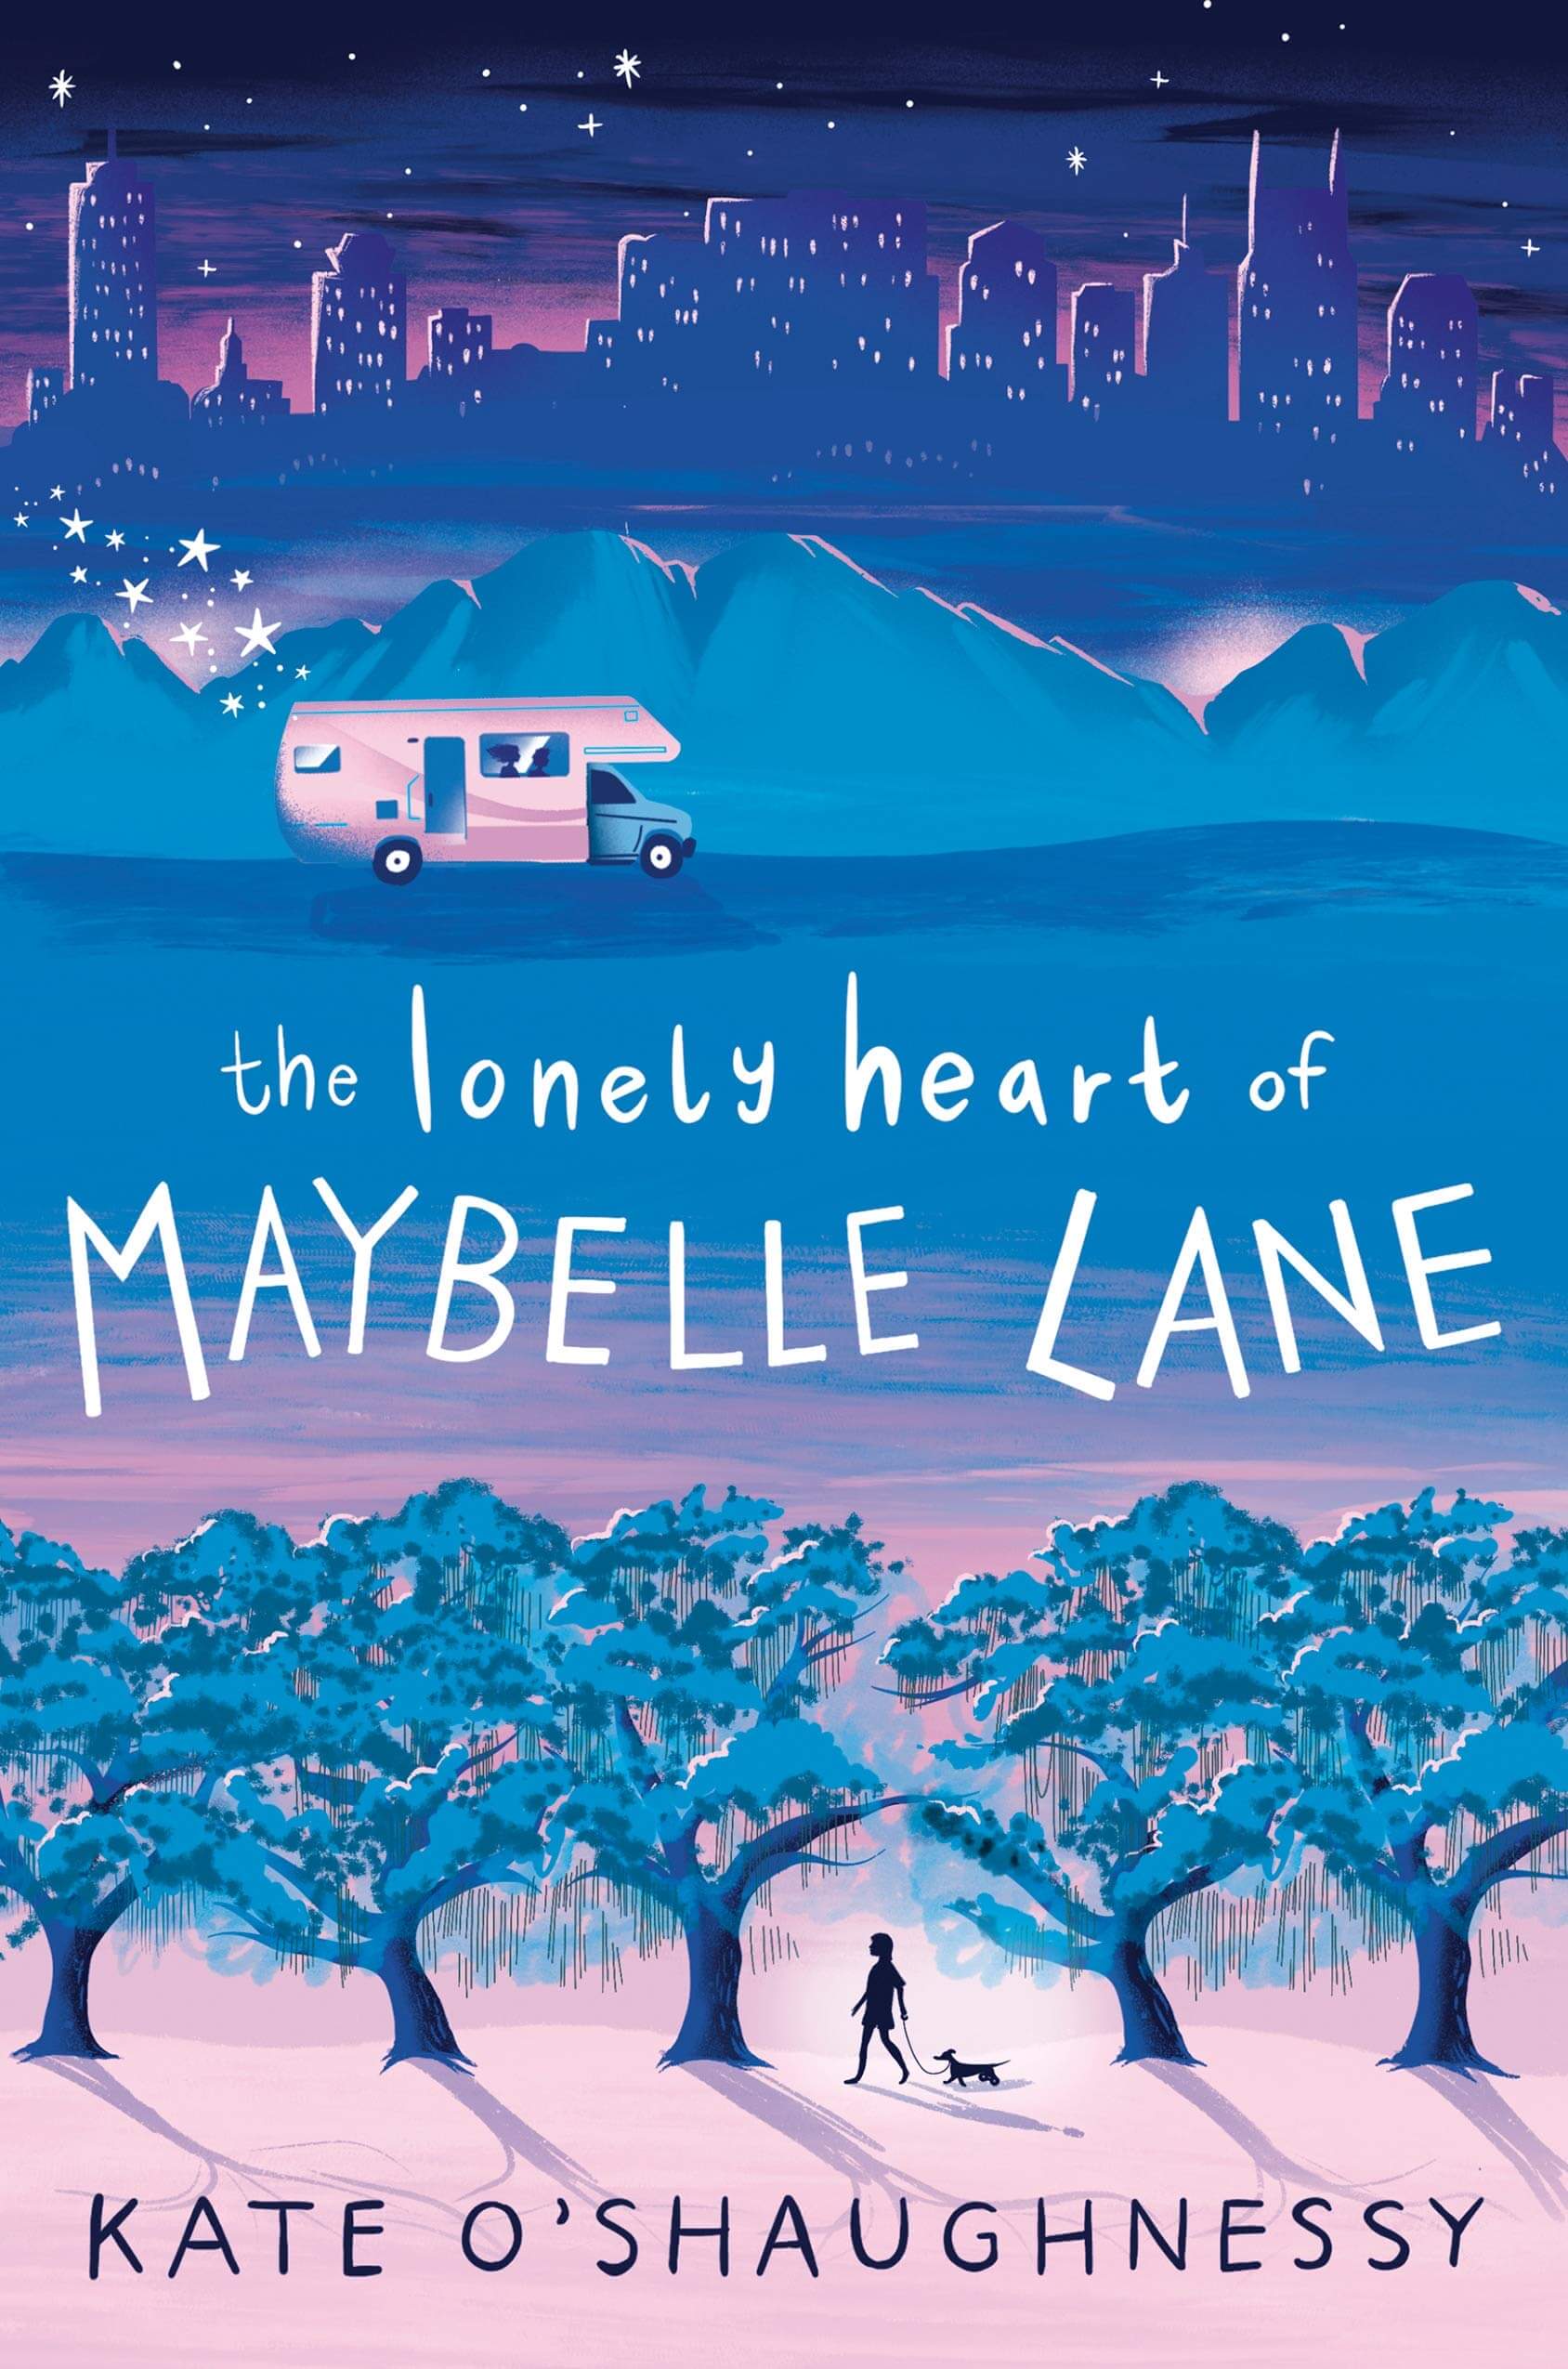 The Lonely Heart of Maybelle Lane by Kate O’Shaughnessy